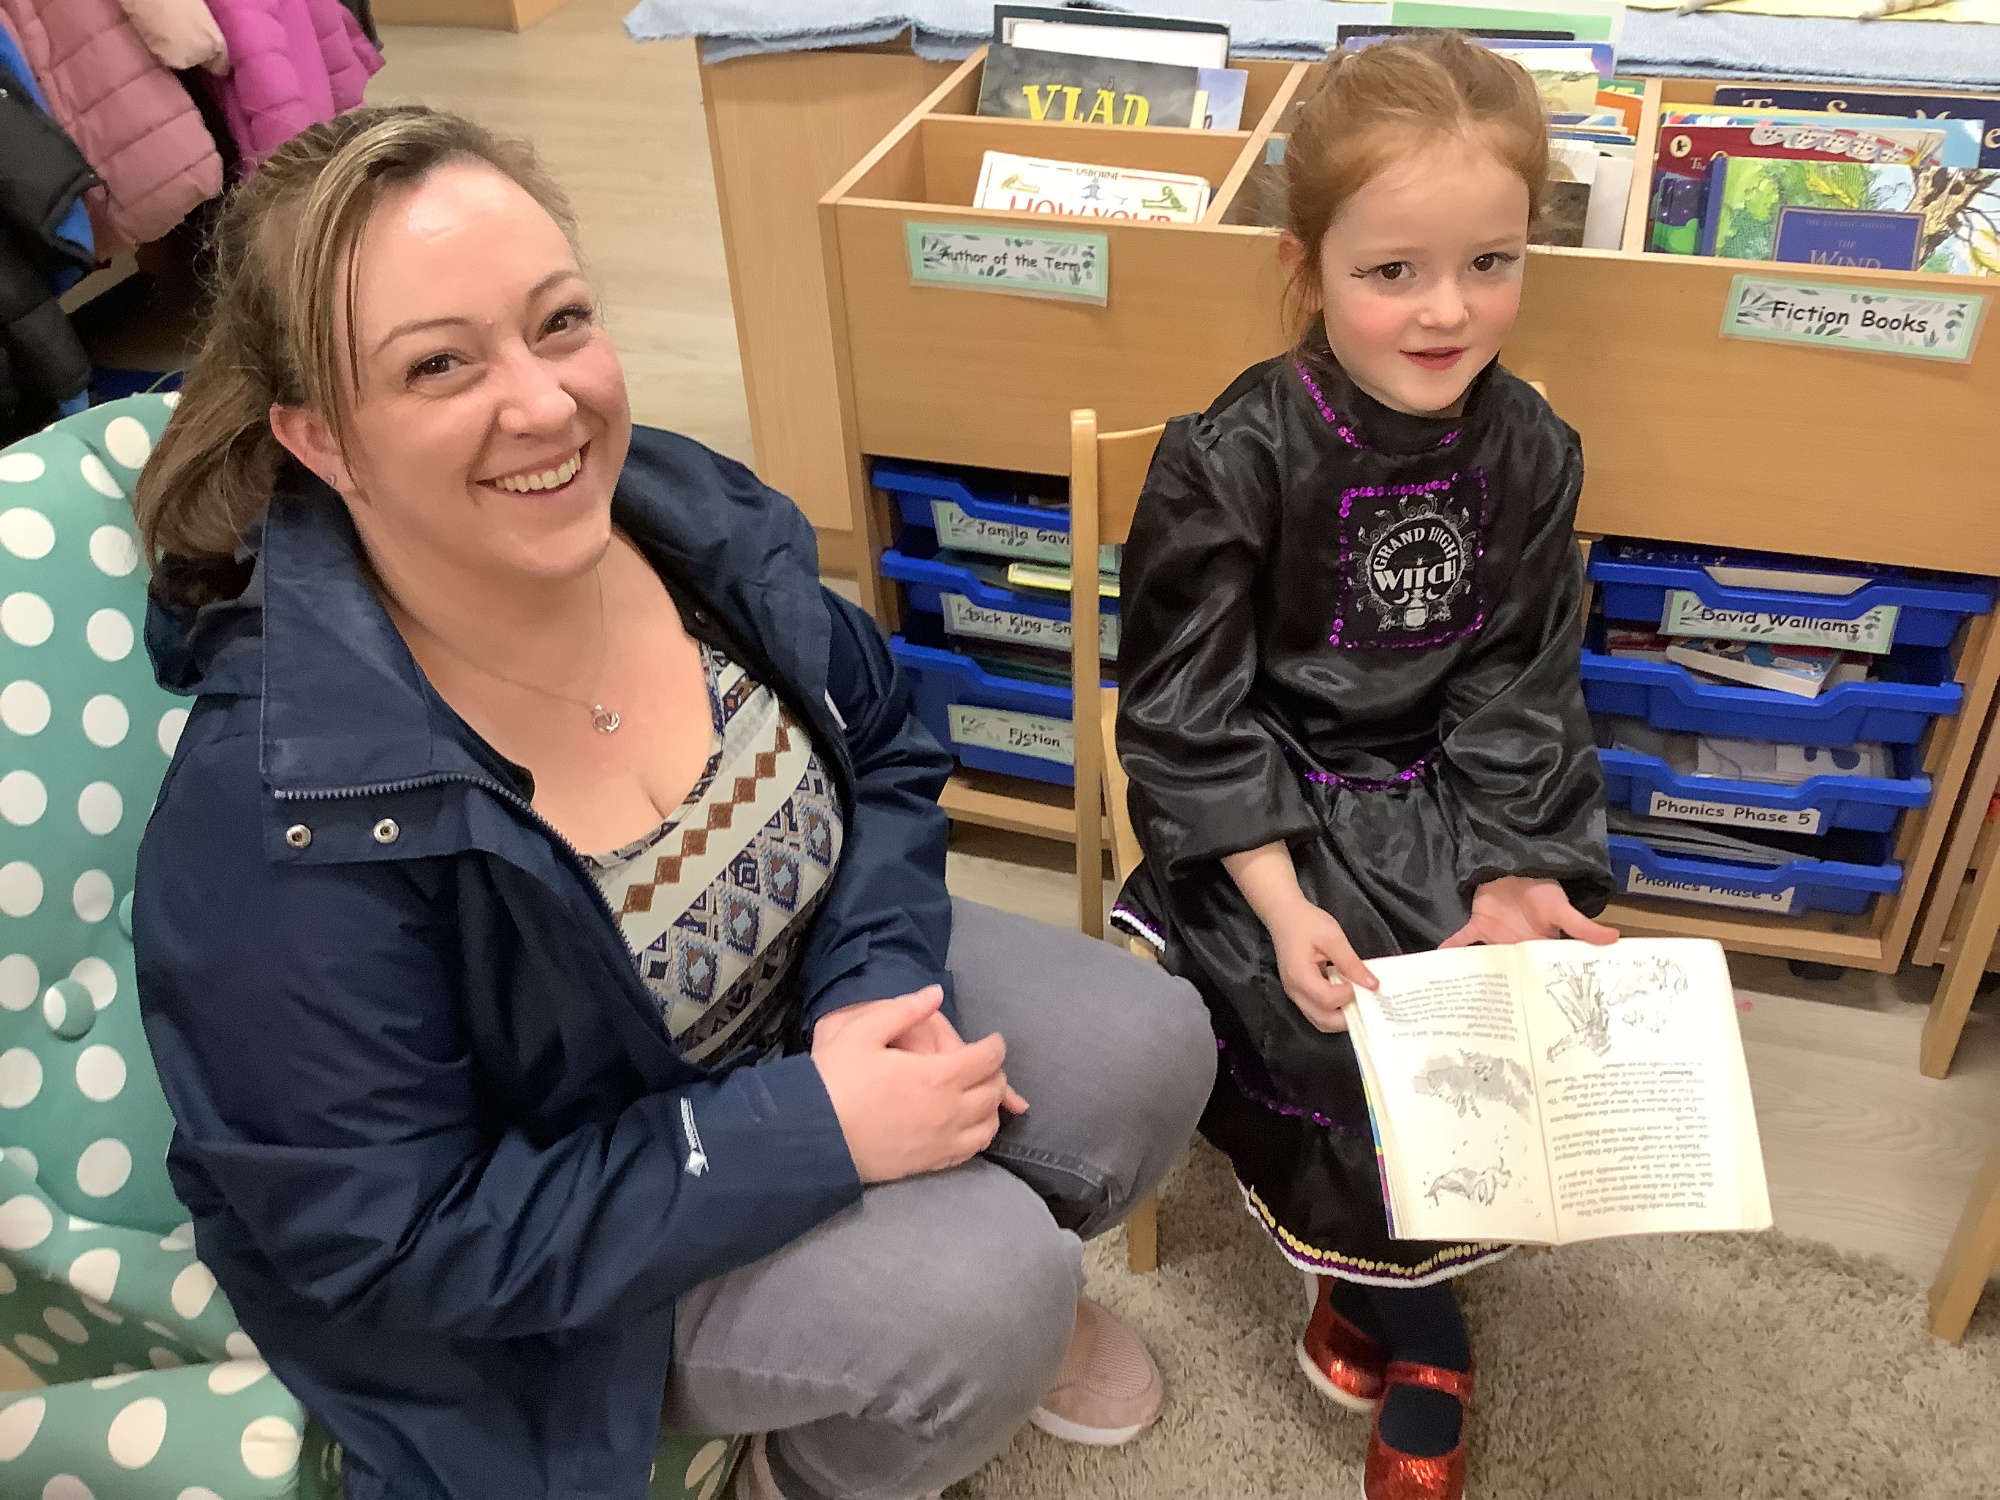 Parent reading with child dressed up in costumes for World Book Day 24